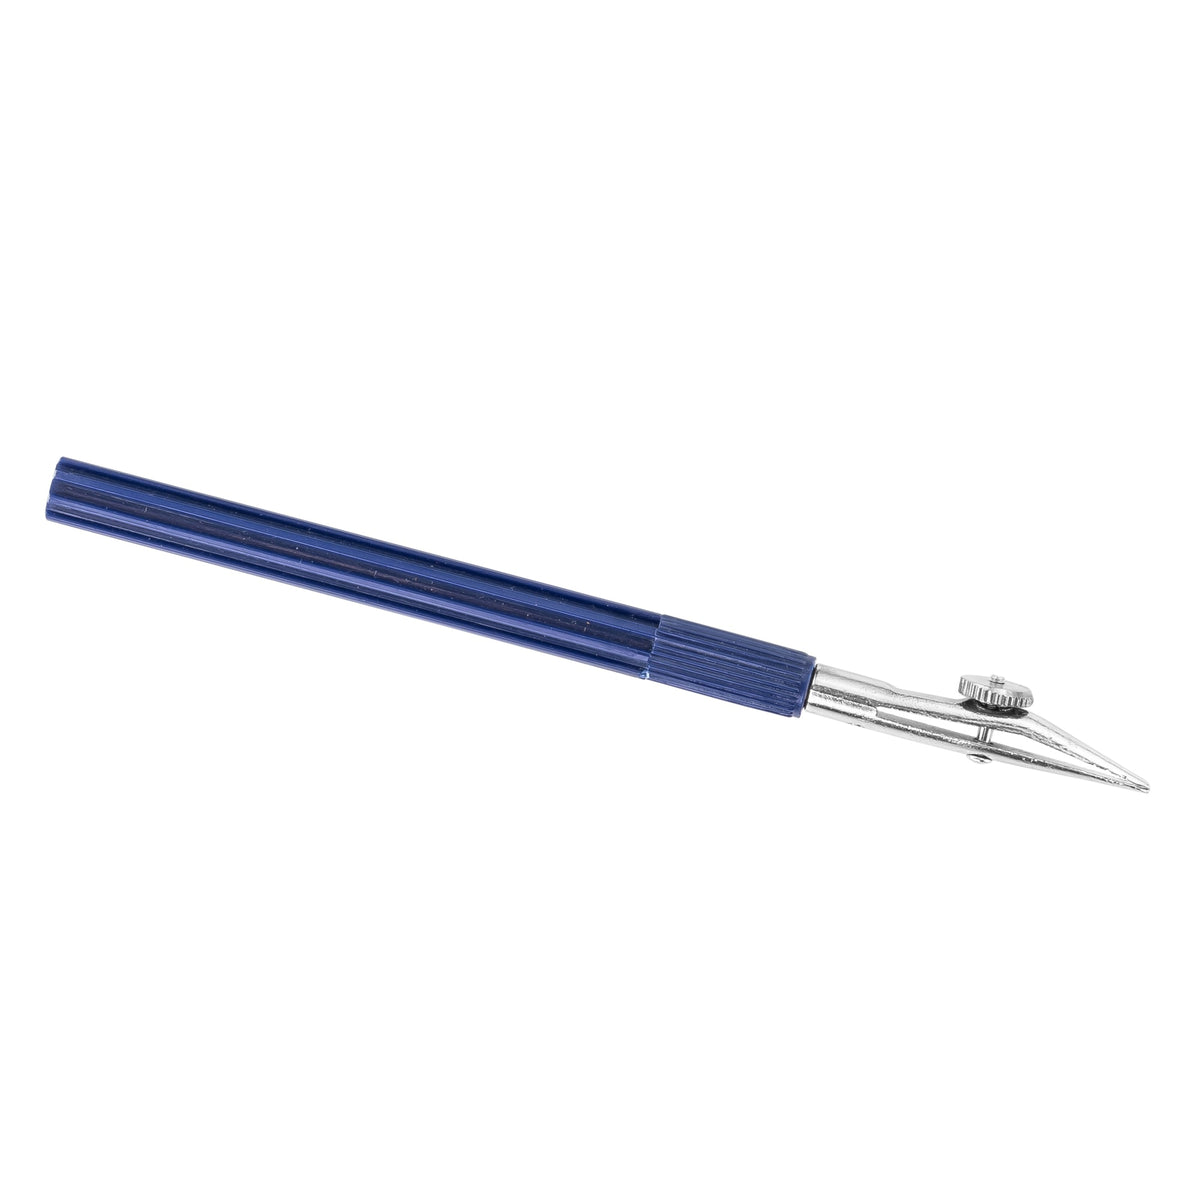 Pacific Arc, Ruling Pen: with handle